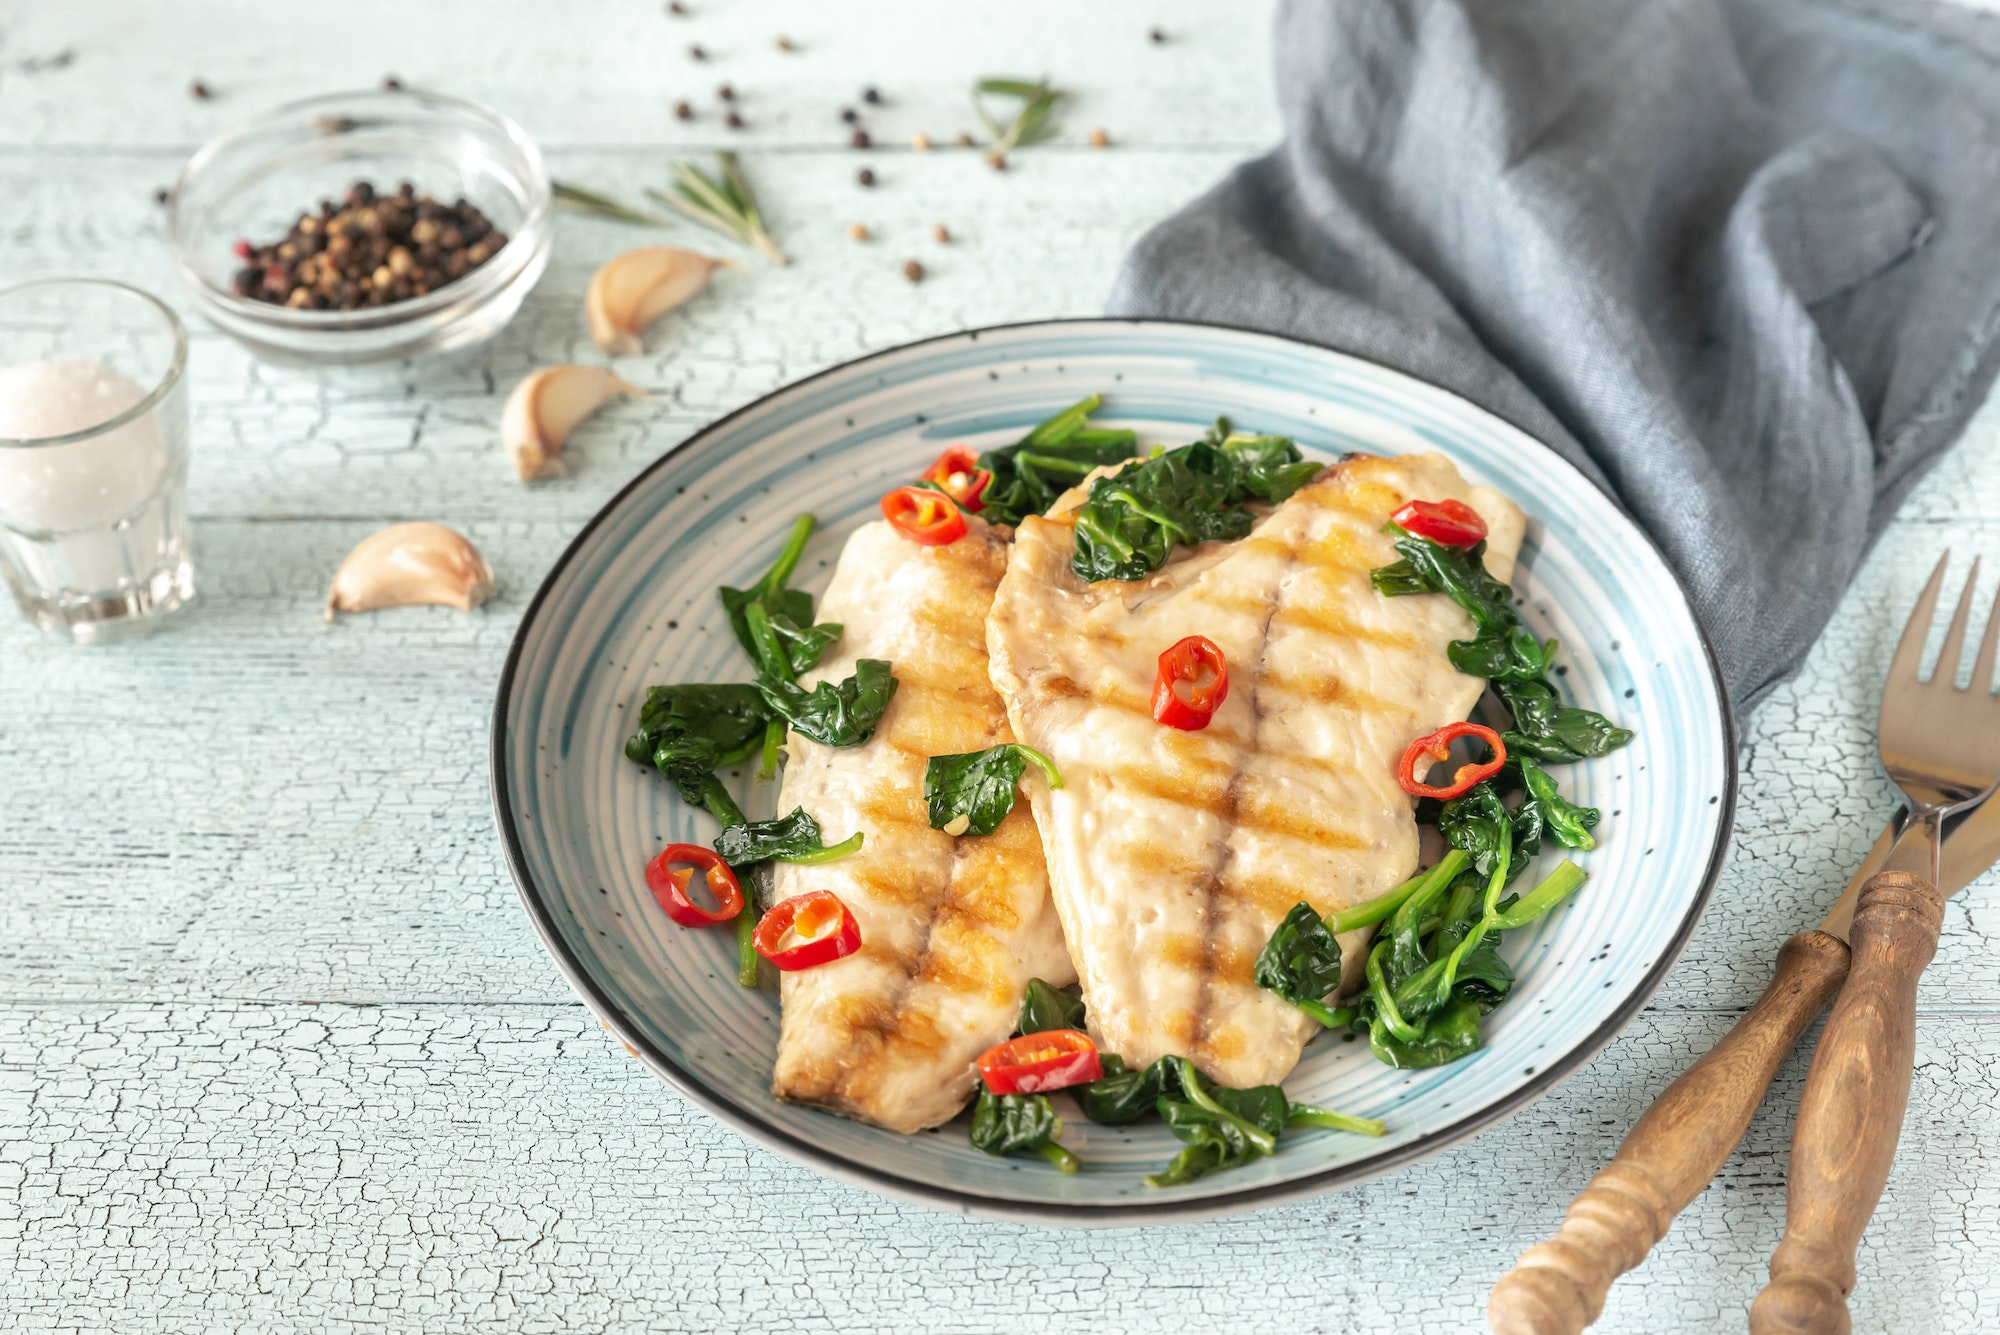 Grilled sea bream fish fillet with spinach